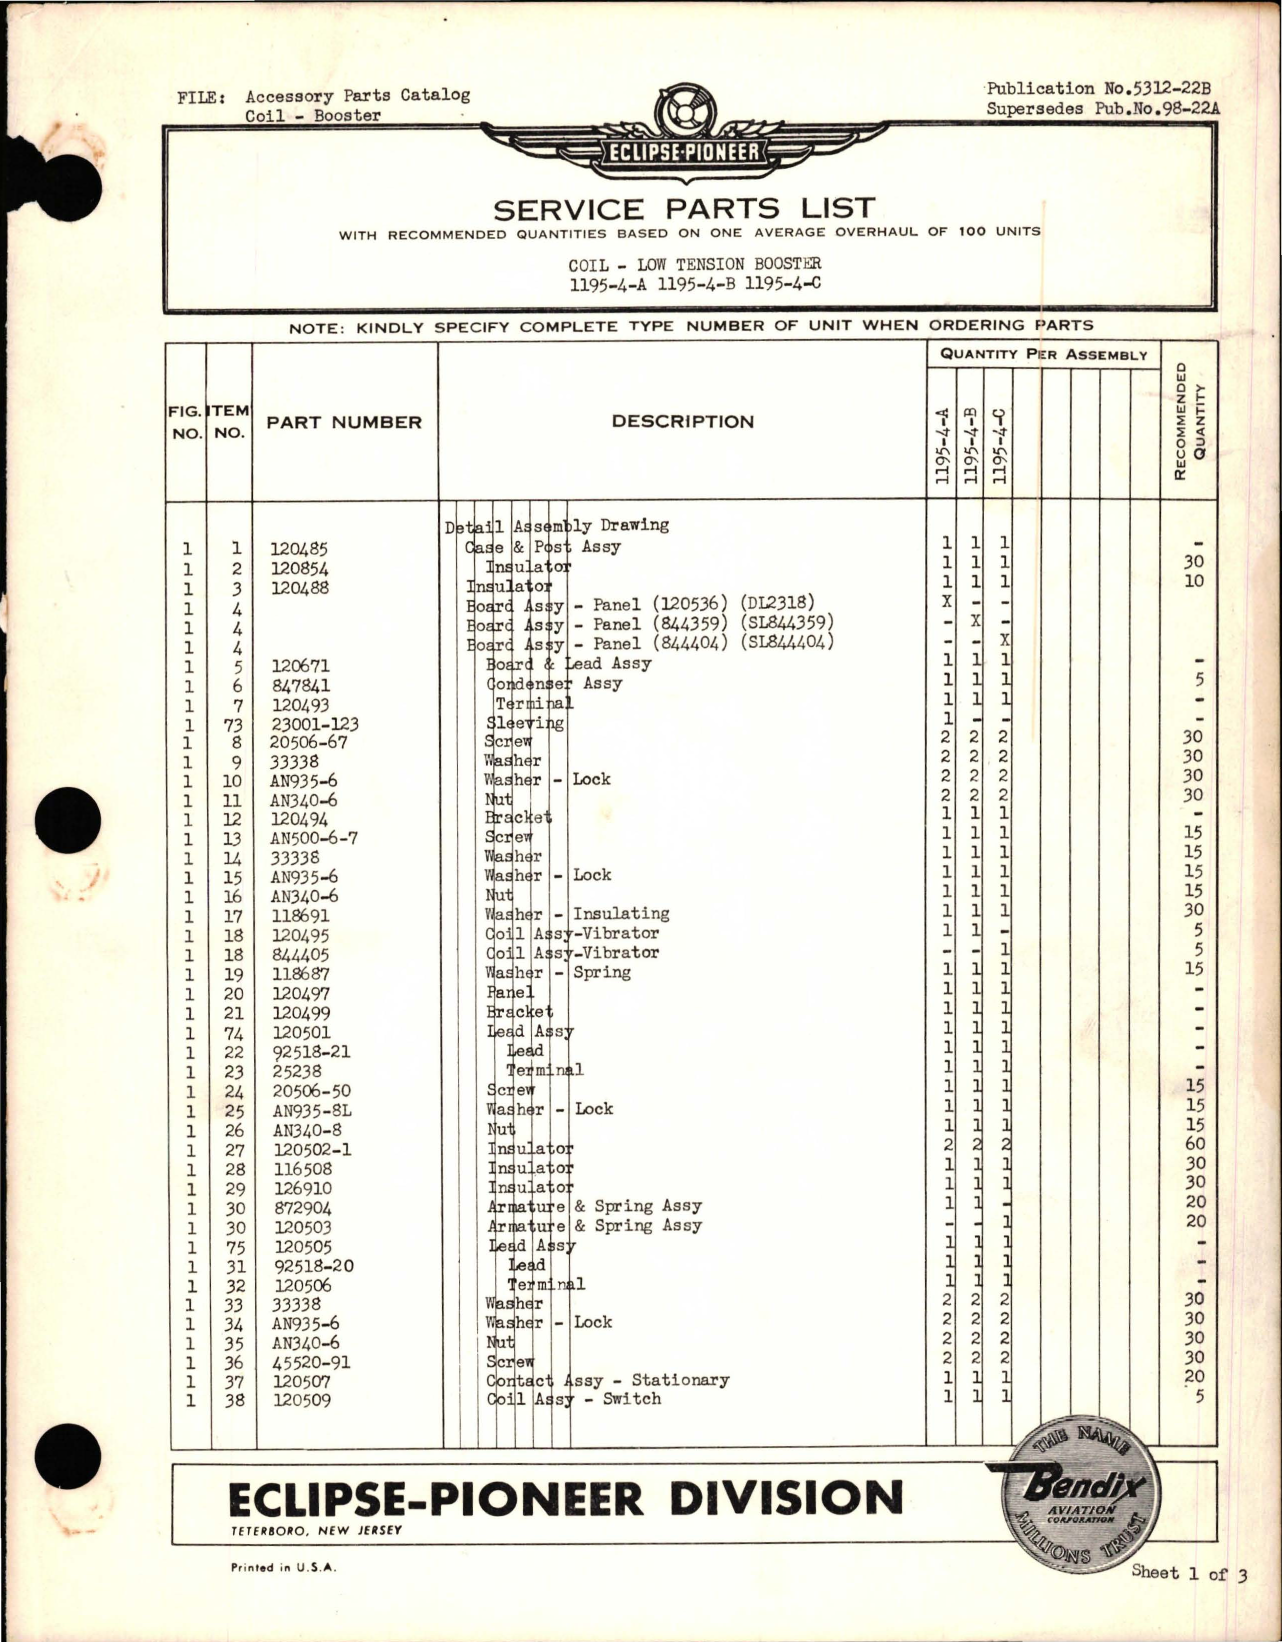 Sample page 1 from AirCorps Library document: Service Parts List for Low Tension Booster Coil - 1195-4-A, 1195-4-B, and 1195-4-C 